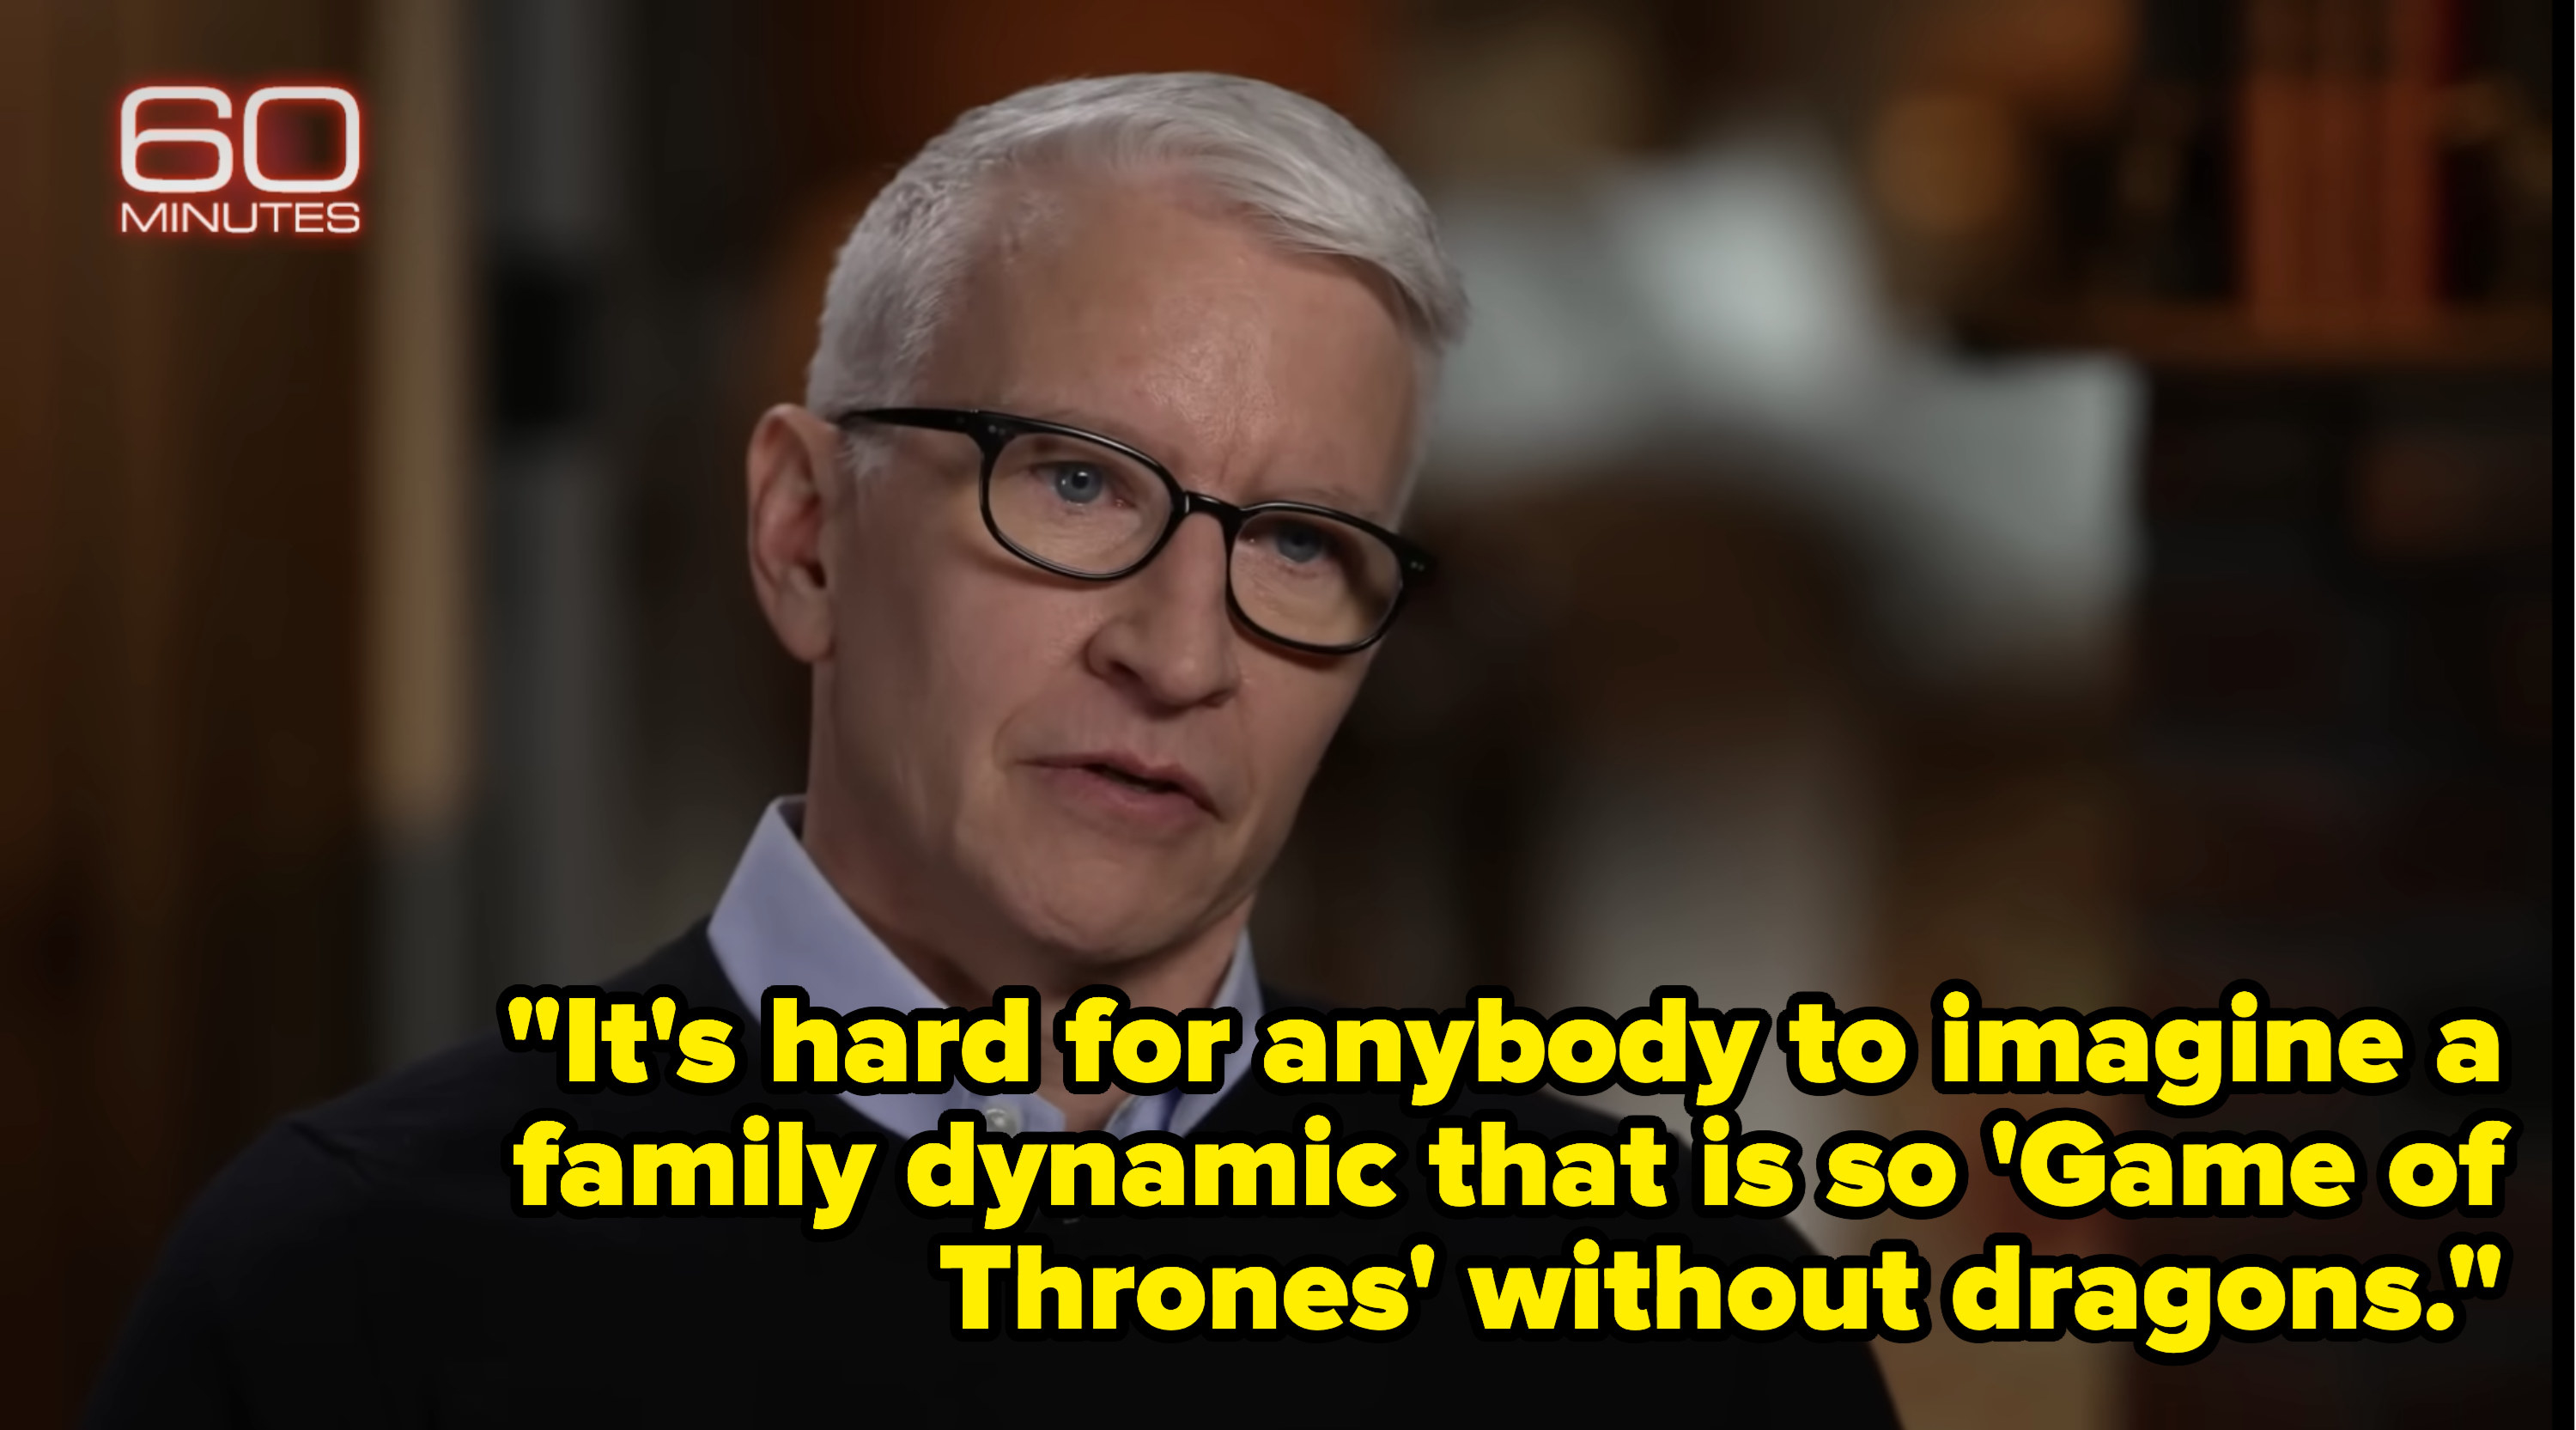 Anderson saying &quot;It&#x27;s hard for anybody to imaging a family dynamic that so &#x27;Game of Thrones&#x27; without dragons&#x27;&quot;